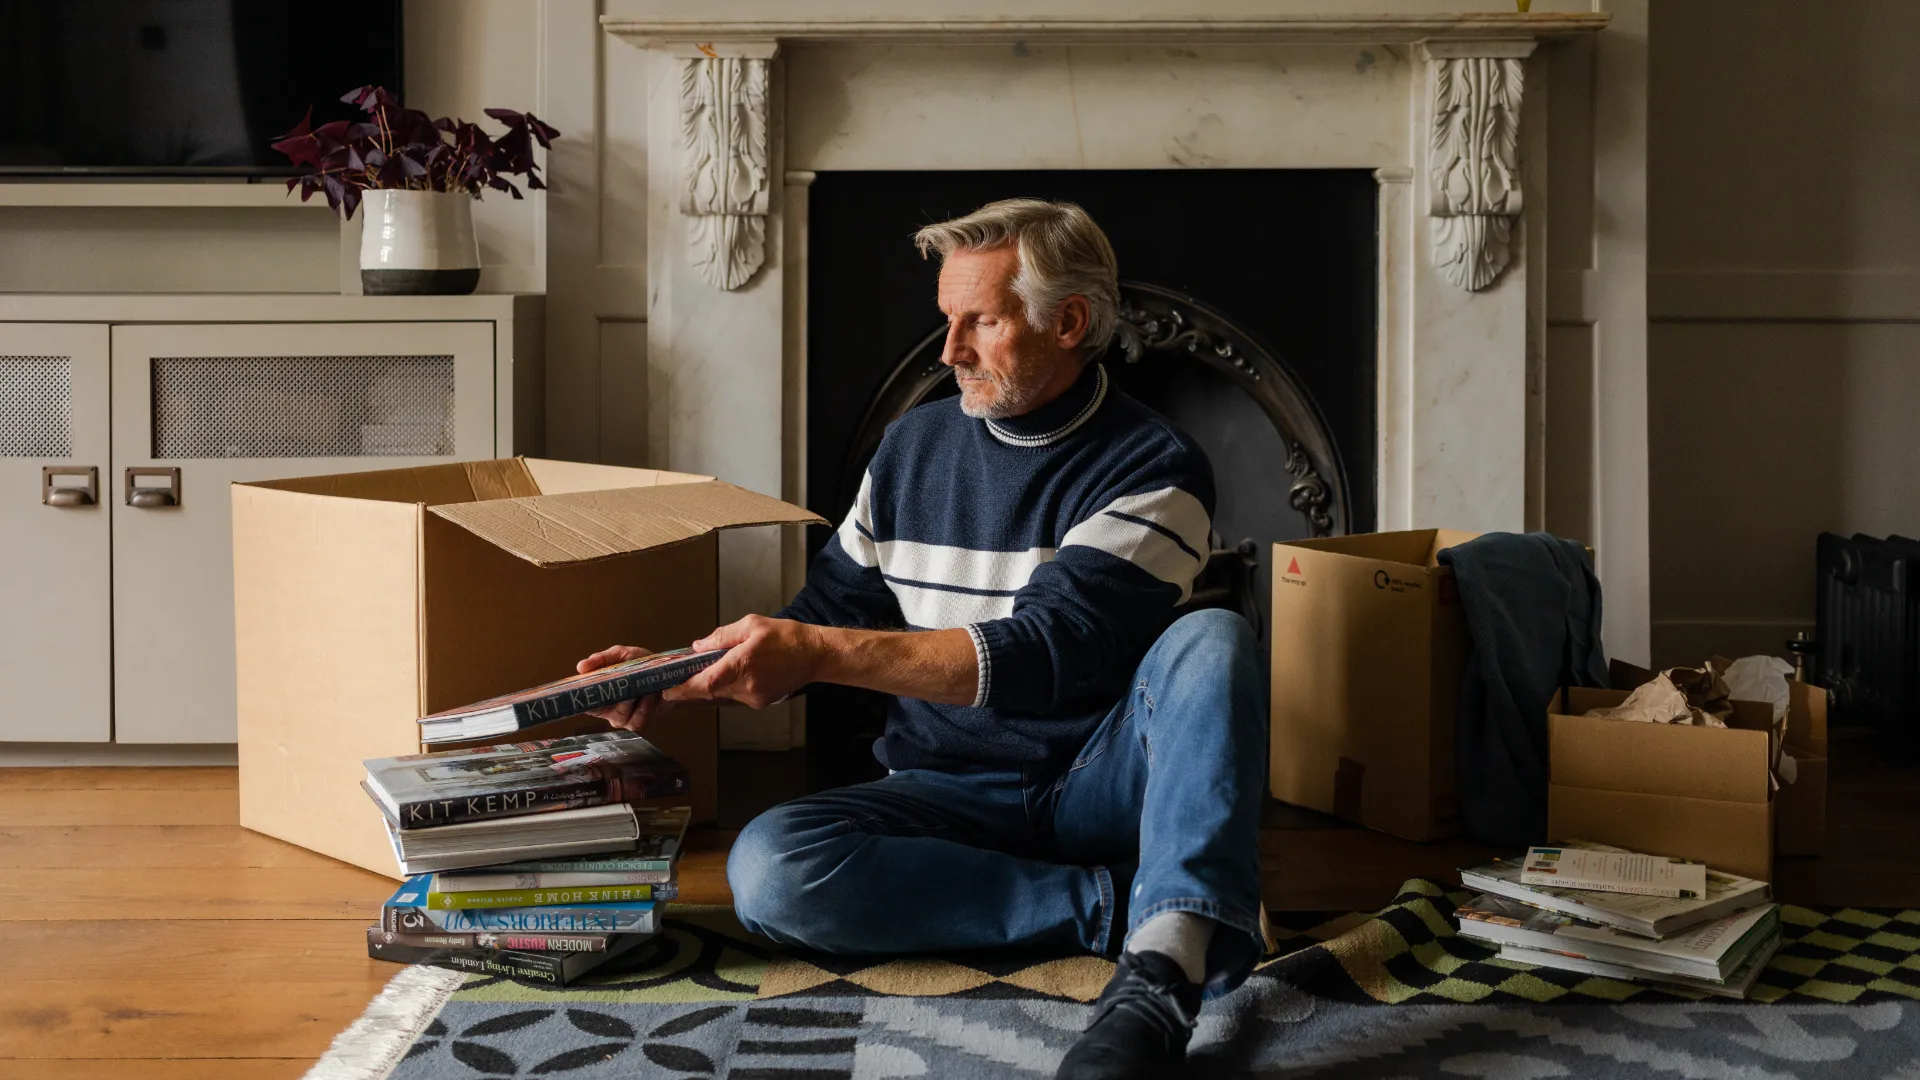 man packing boxes in front of a fireplace